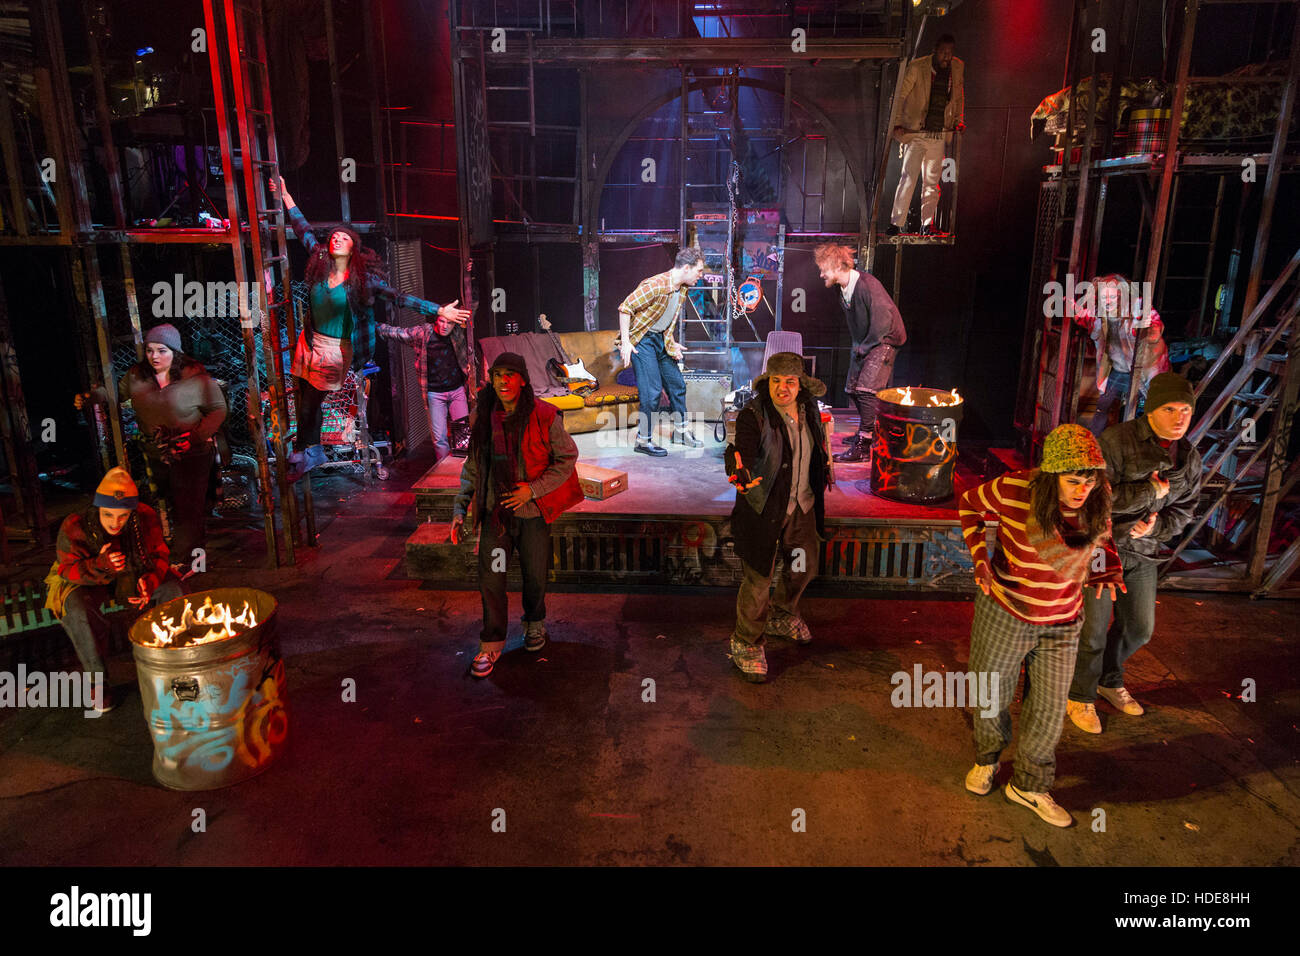 Rent - The Musical runs at St James Theatre from 8 December 2016 to 28 January 2017. The new 20th Anniversary production of Jonathan Larson's Pulitzer Prize- and Tony Award-winning musical is directed by Bruce Guthrie. With Billy Cullum as Mark Cohen, Ross Hunter as Roger Davis, Ryan O'Gorman as Tom Collins, Javar La'trial Parker as Benjamin Coffin III, Layton Williams as Angel Schunard, Philippa Stefani as Mimi Marquez, Lucie Jones as Maureen Jonson and Shanay Holmes as Joanne Jefferson. Stock Photo